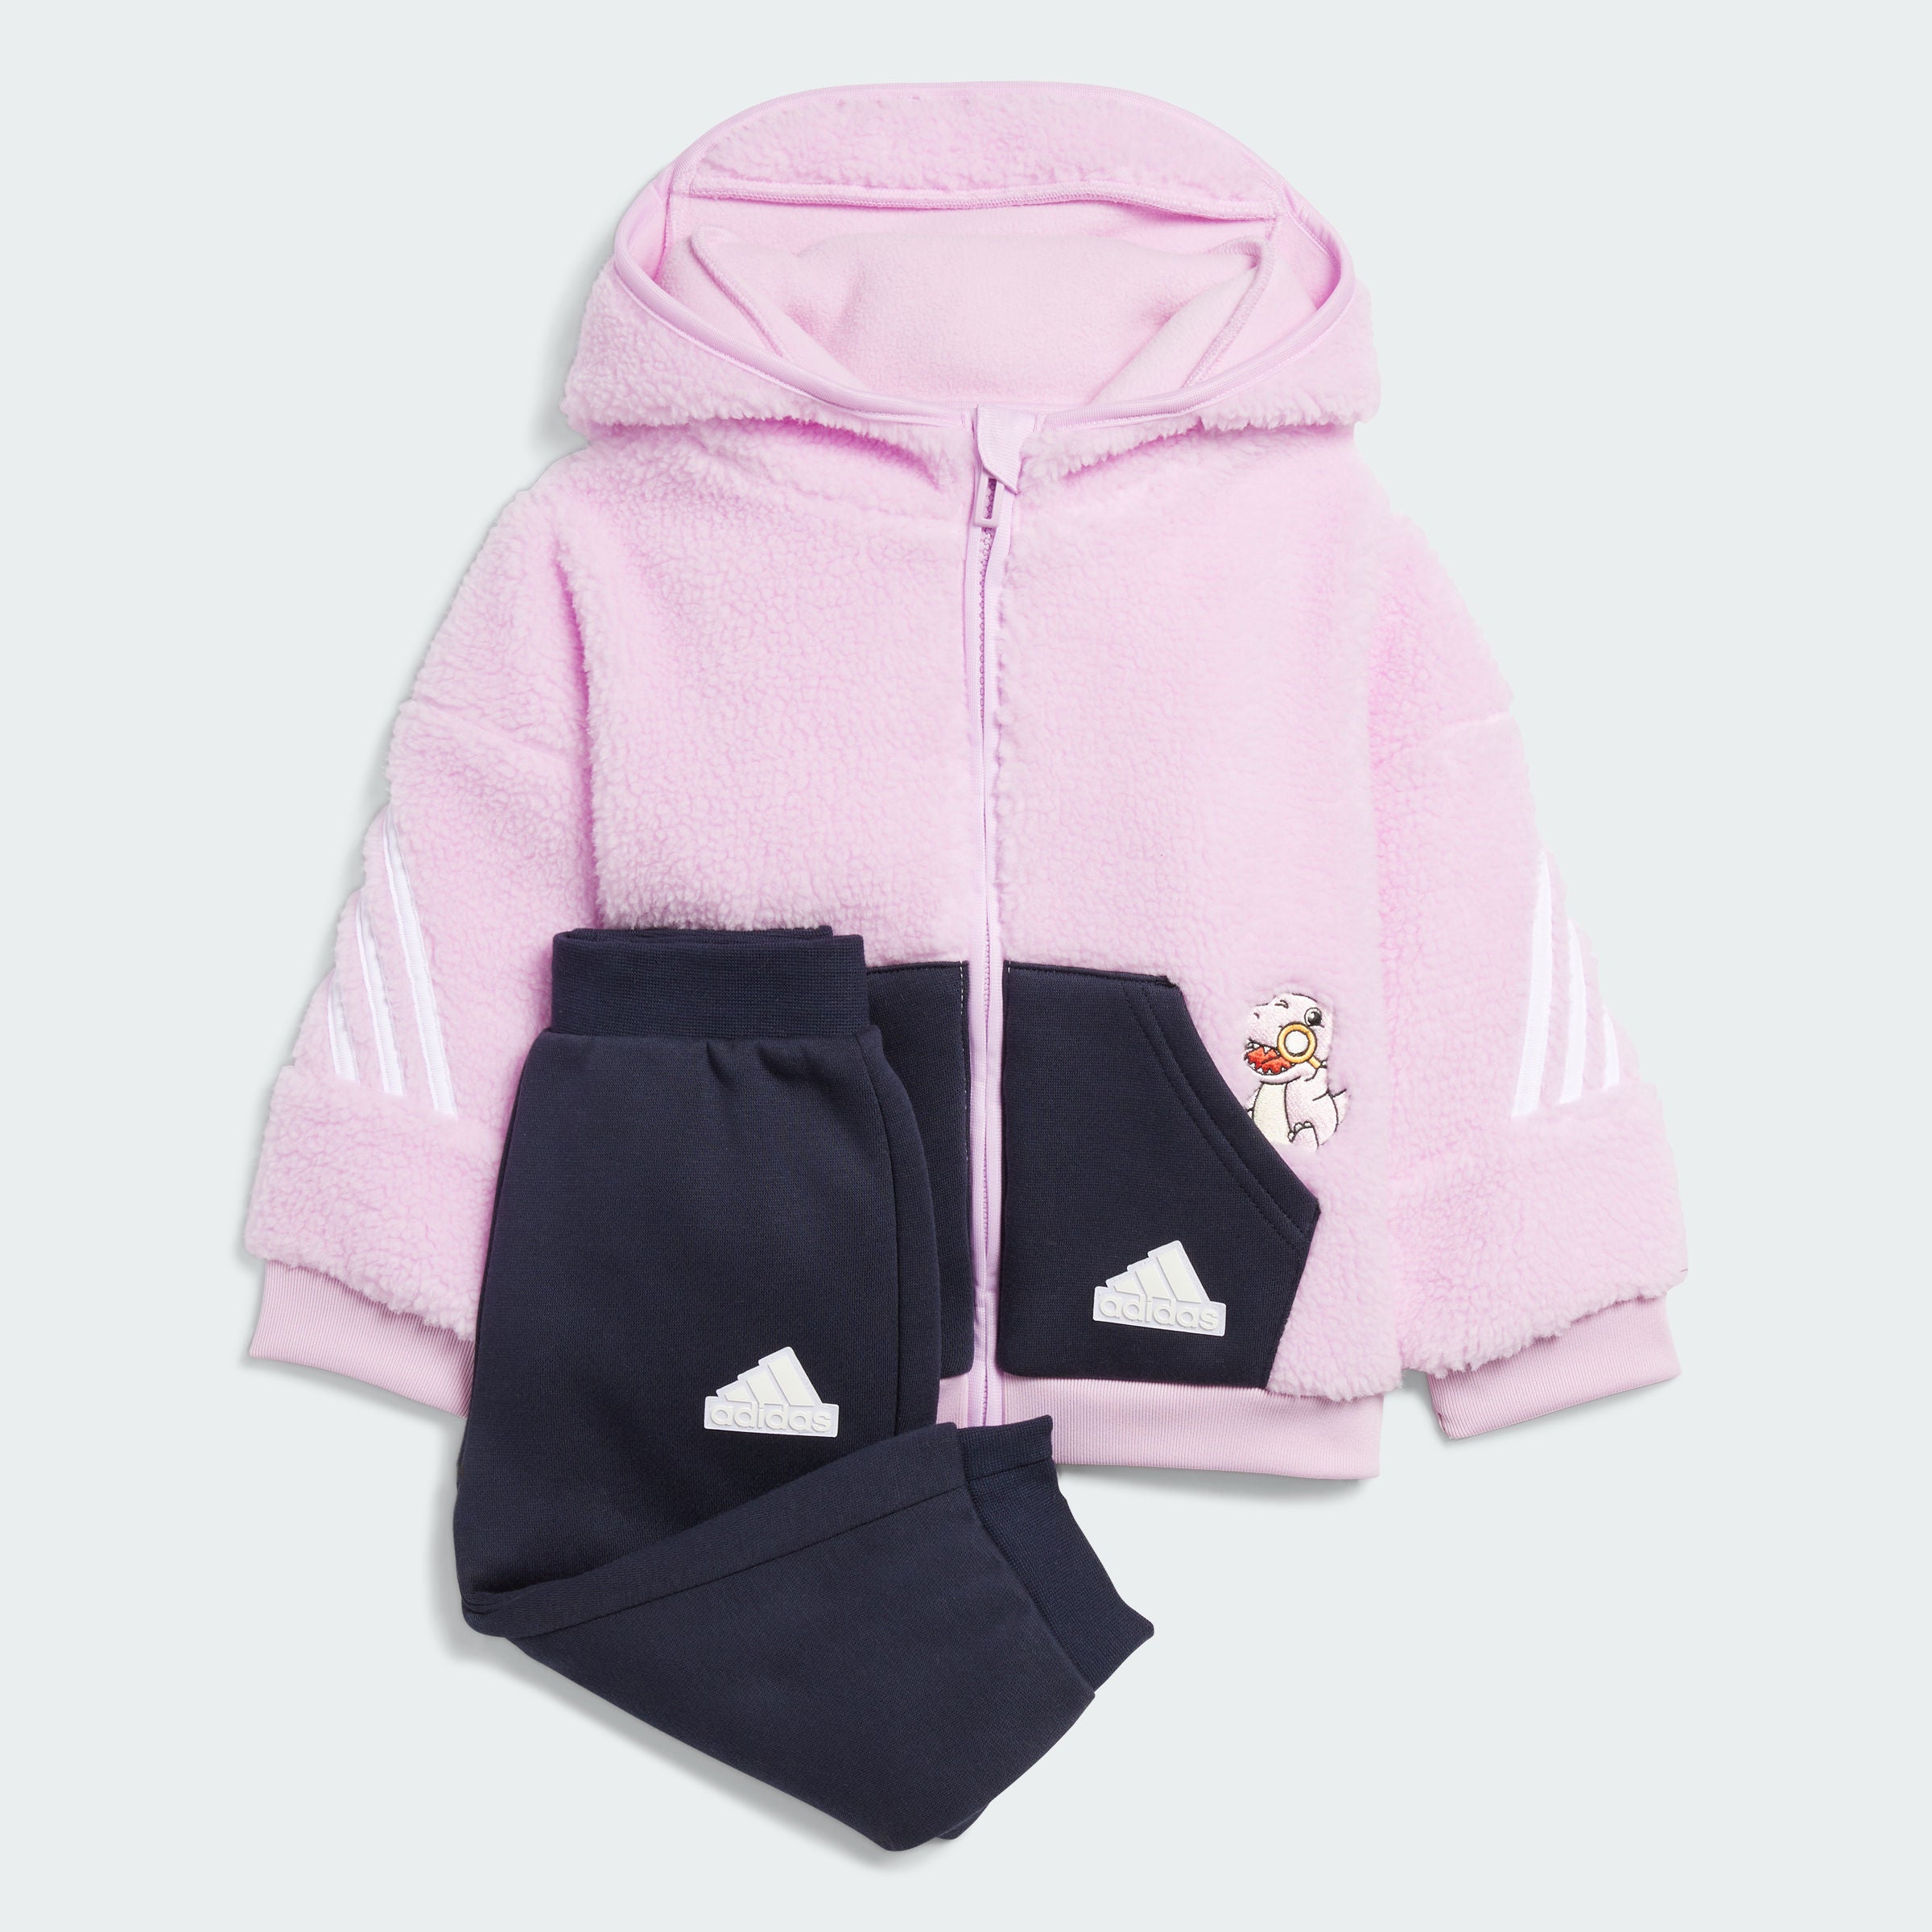 adidas, CITY ESCAPE, clothes,  girl, 套裝, 女嬰, 嬰童, 長袖,open for kids